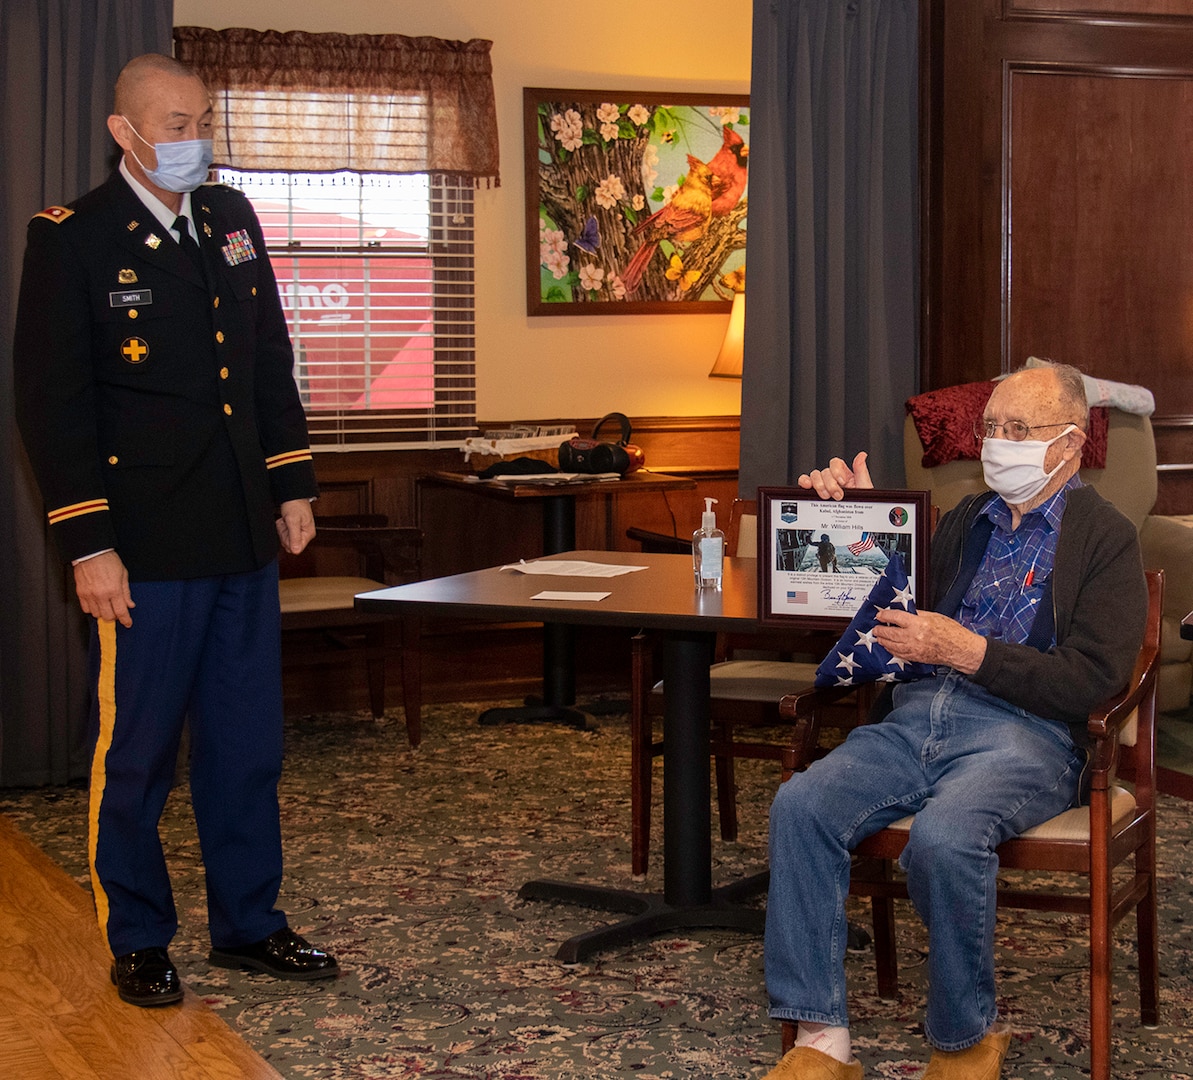 William Hills of Freeport, Illinois, shows off the U.S. flag and certificate presented by Lt. Col. Eric Smith of Springfield, Illinois, in honor of Hills’ 97th birthday Jan. 29.